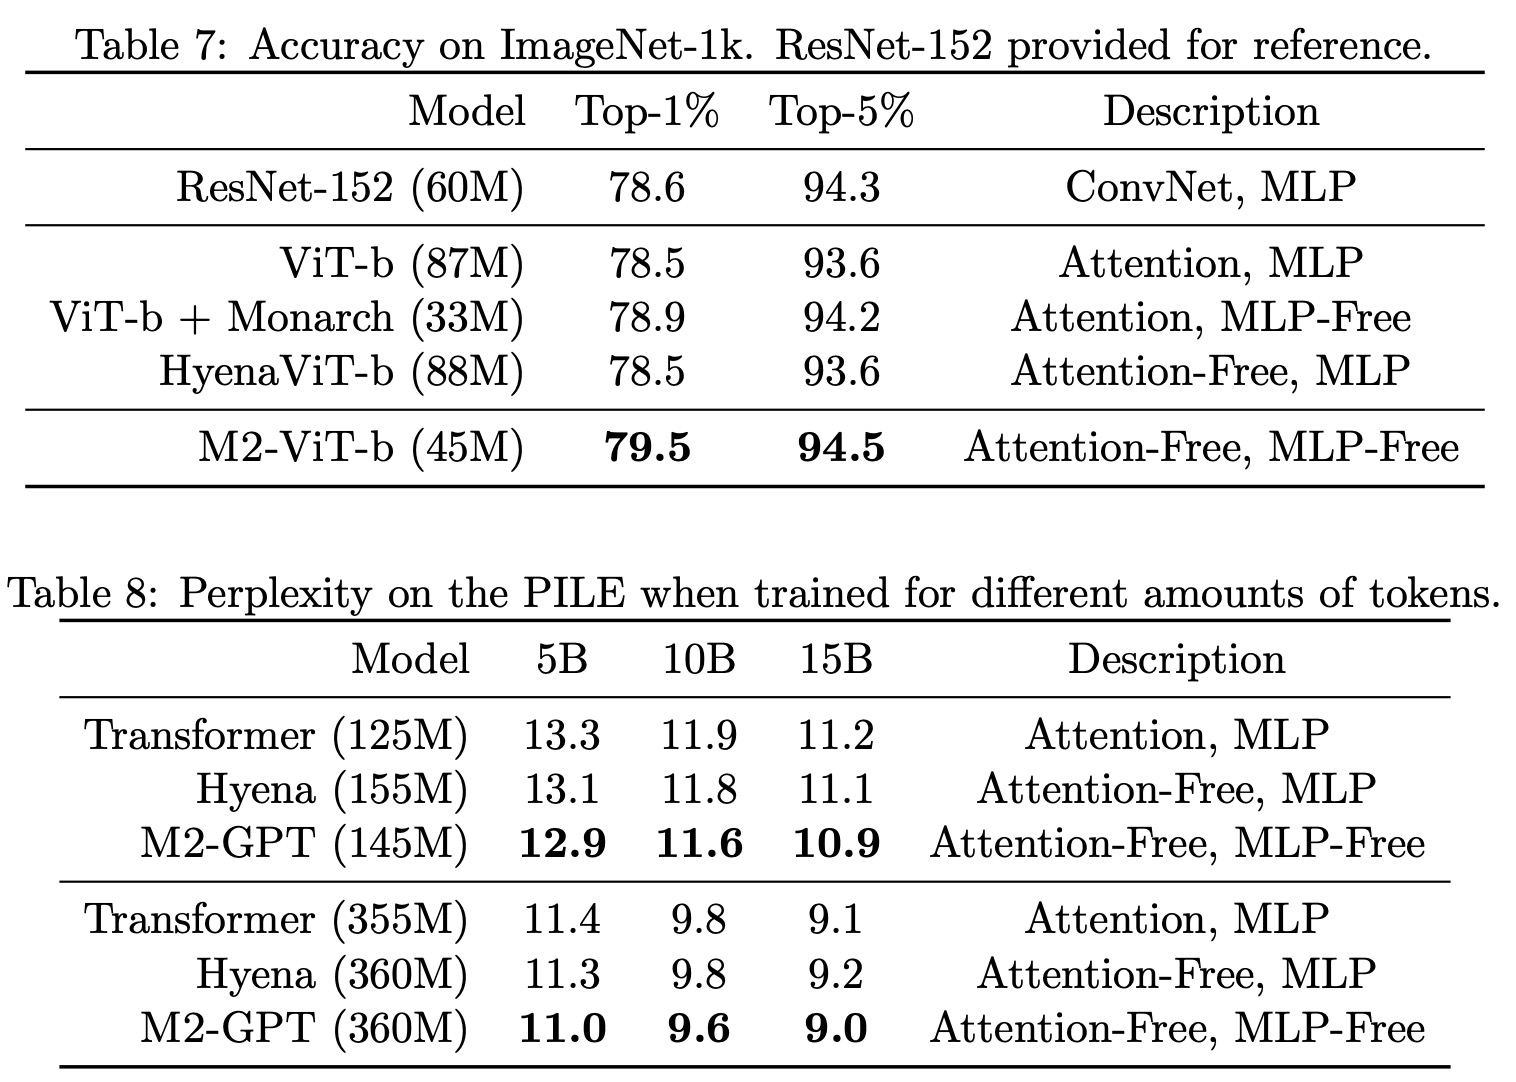 Image Classification and Causal Language Modeling